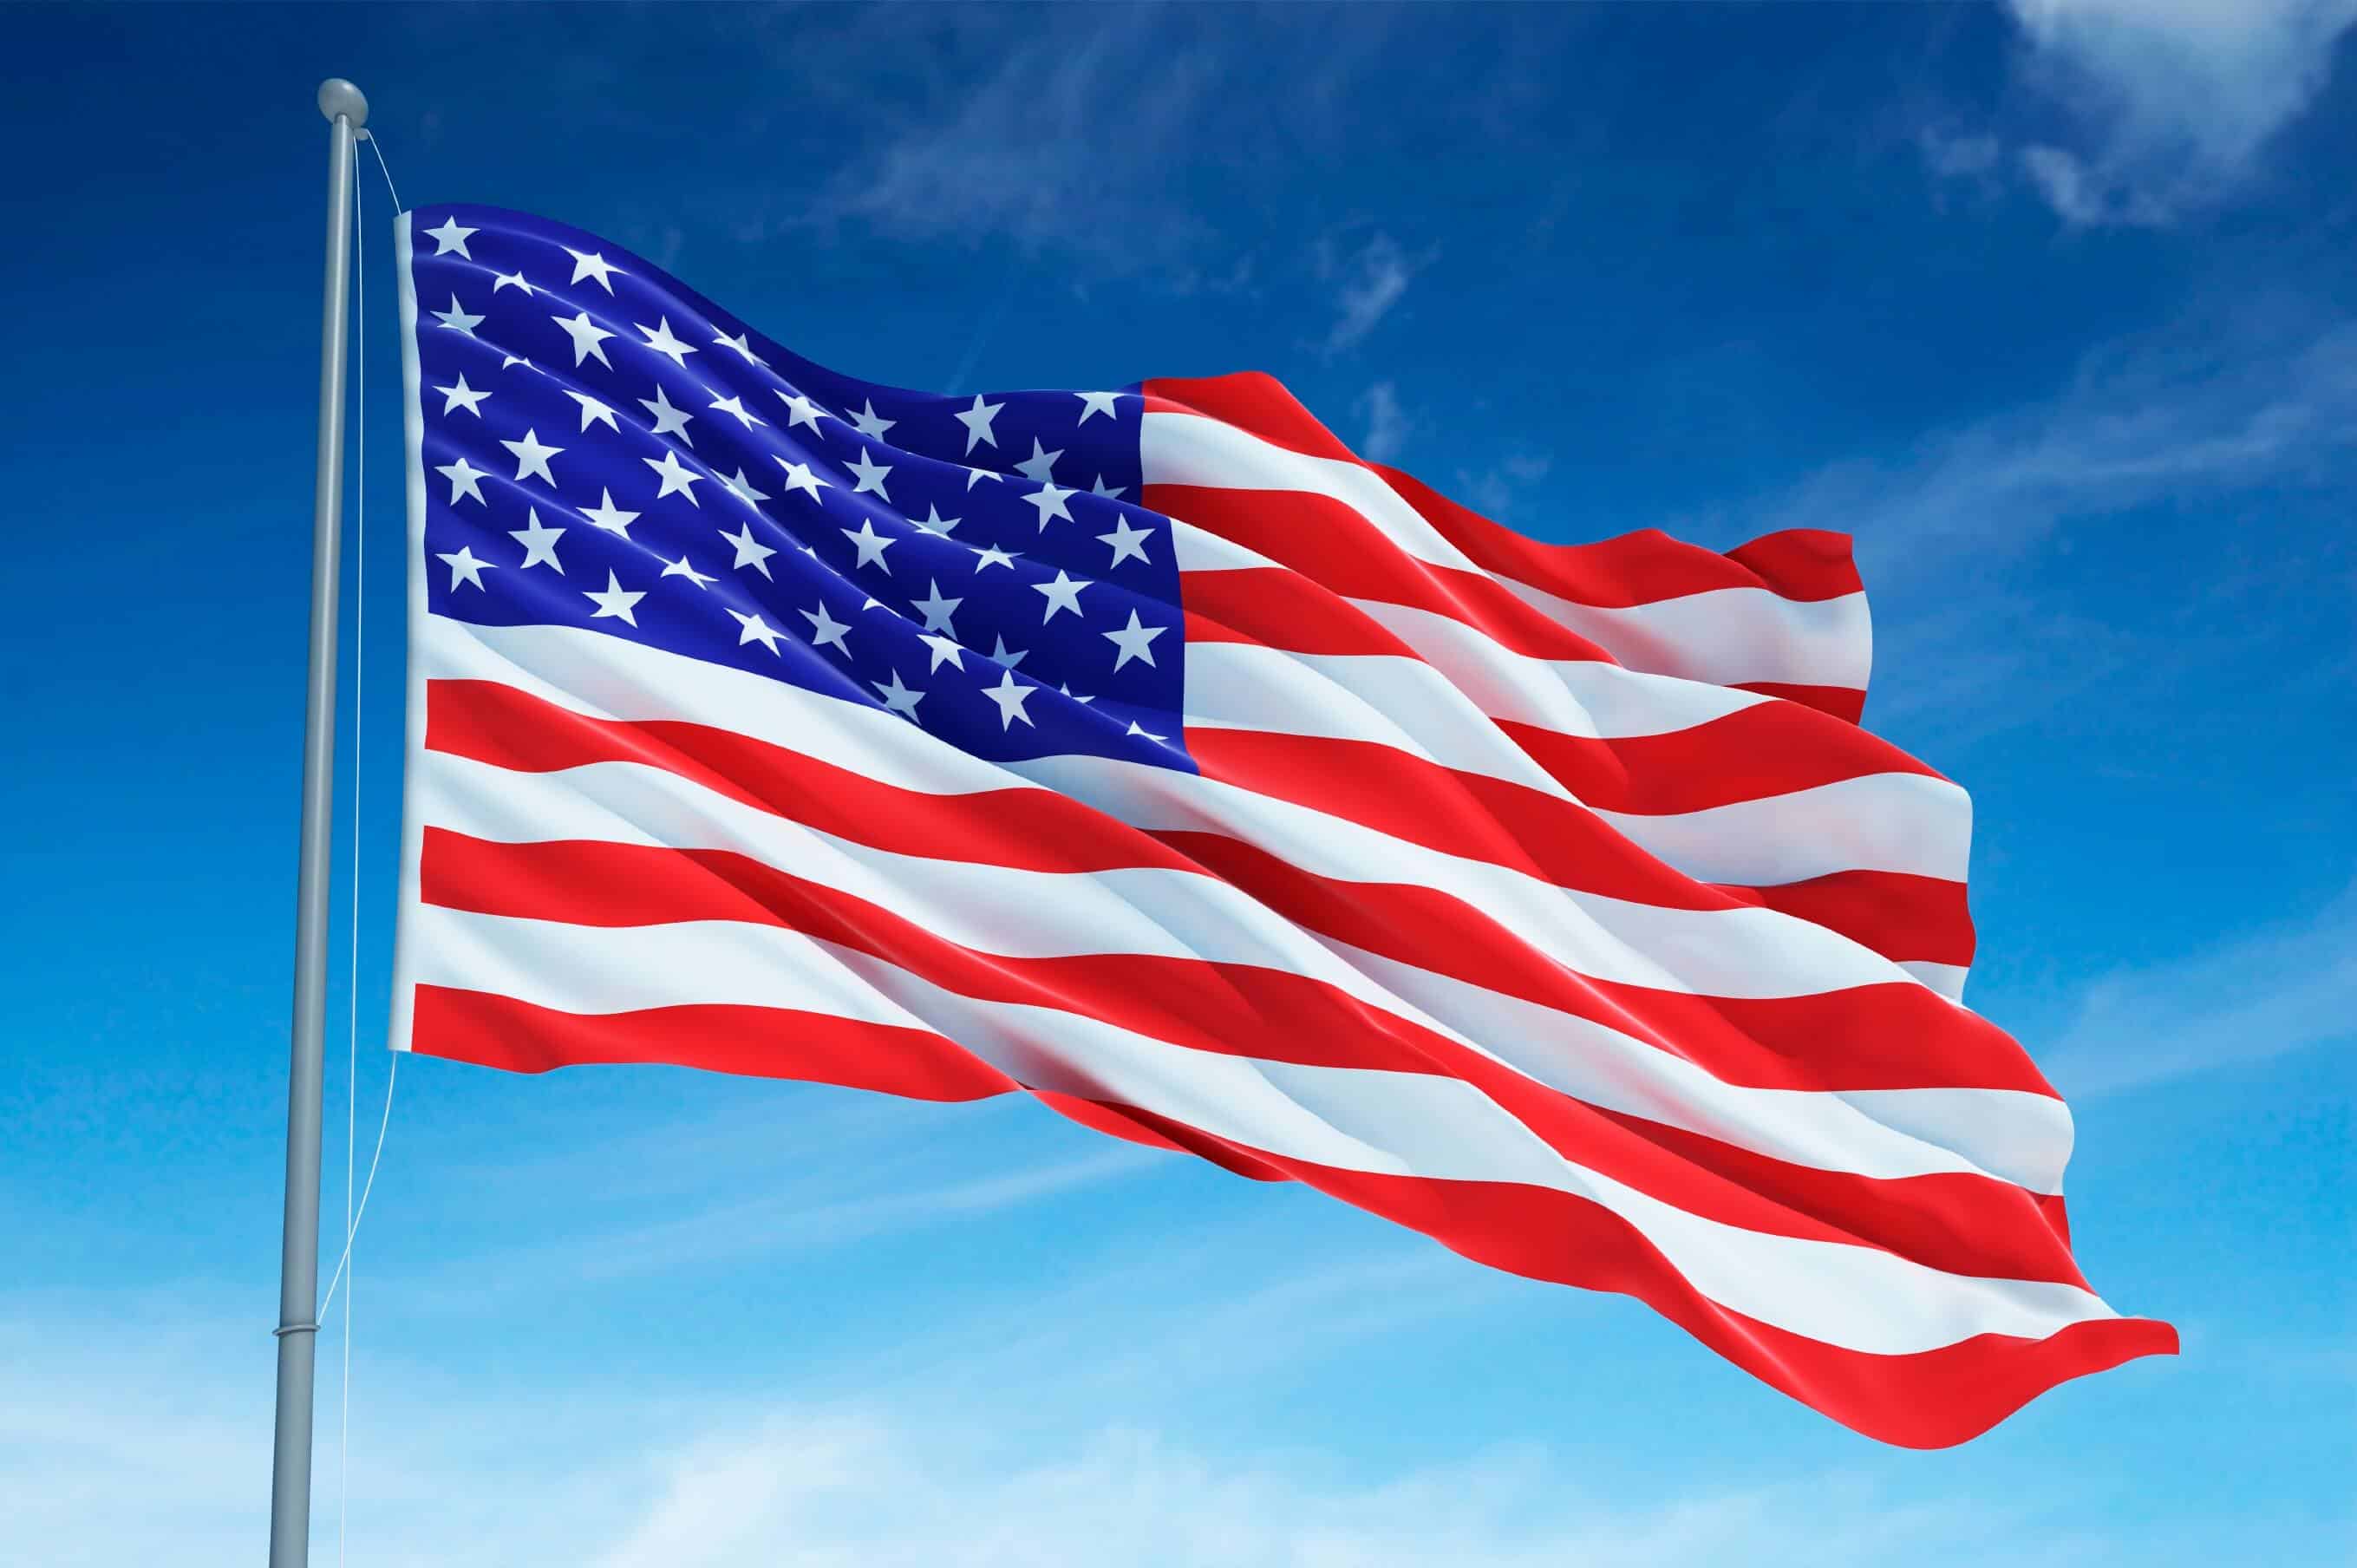 Flag Day 2021 Image, Wallpaper, Picture & Inspirational Quotes